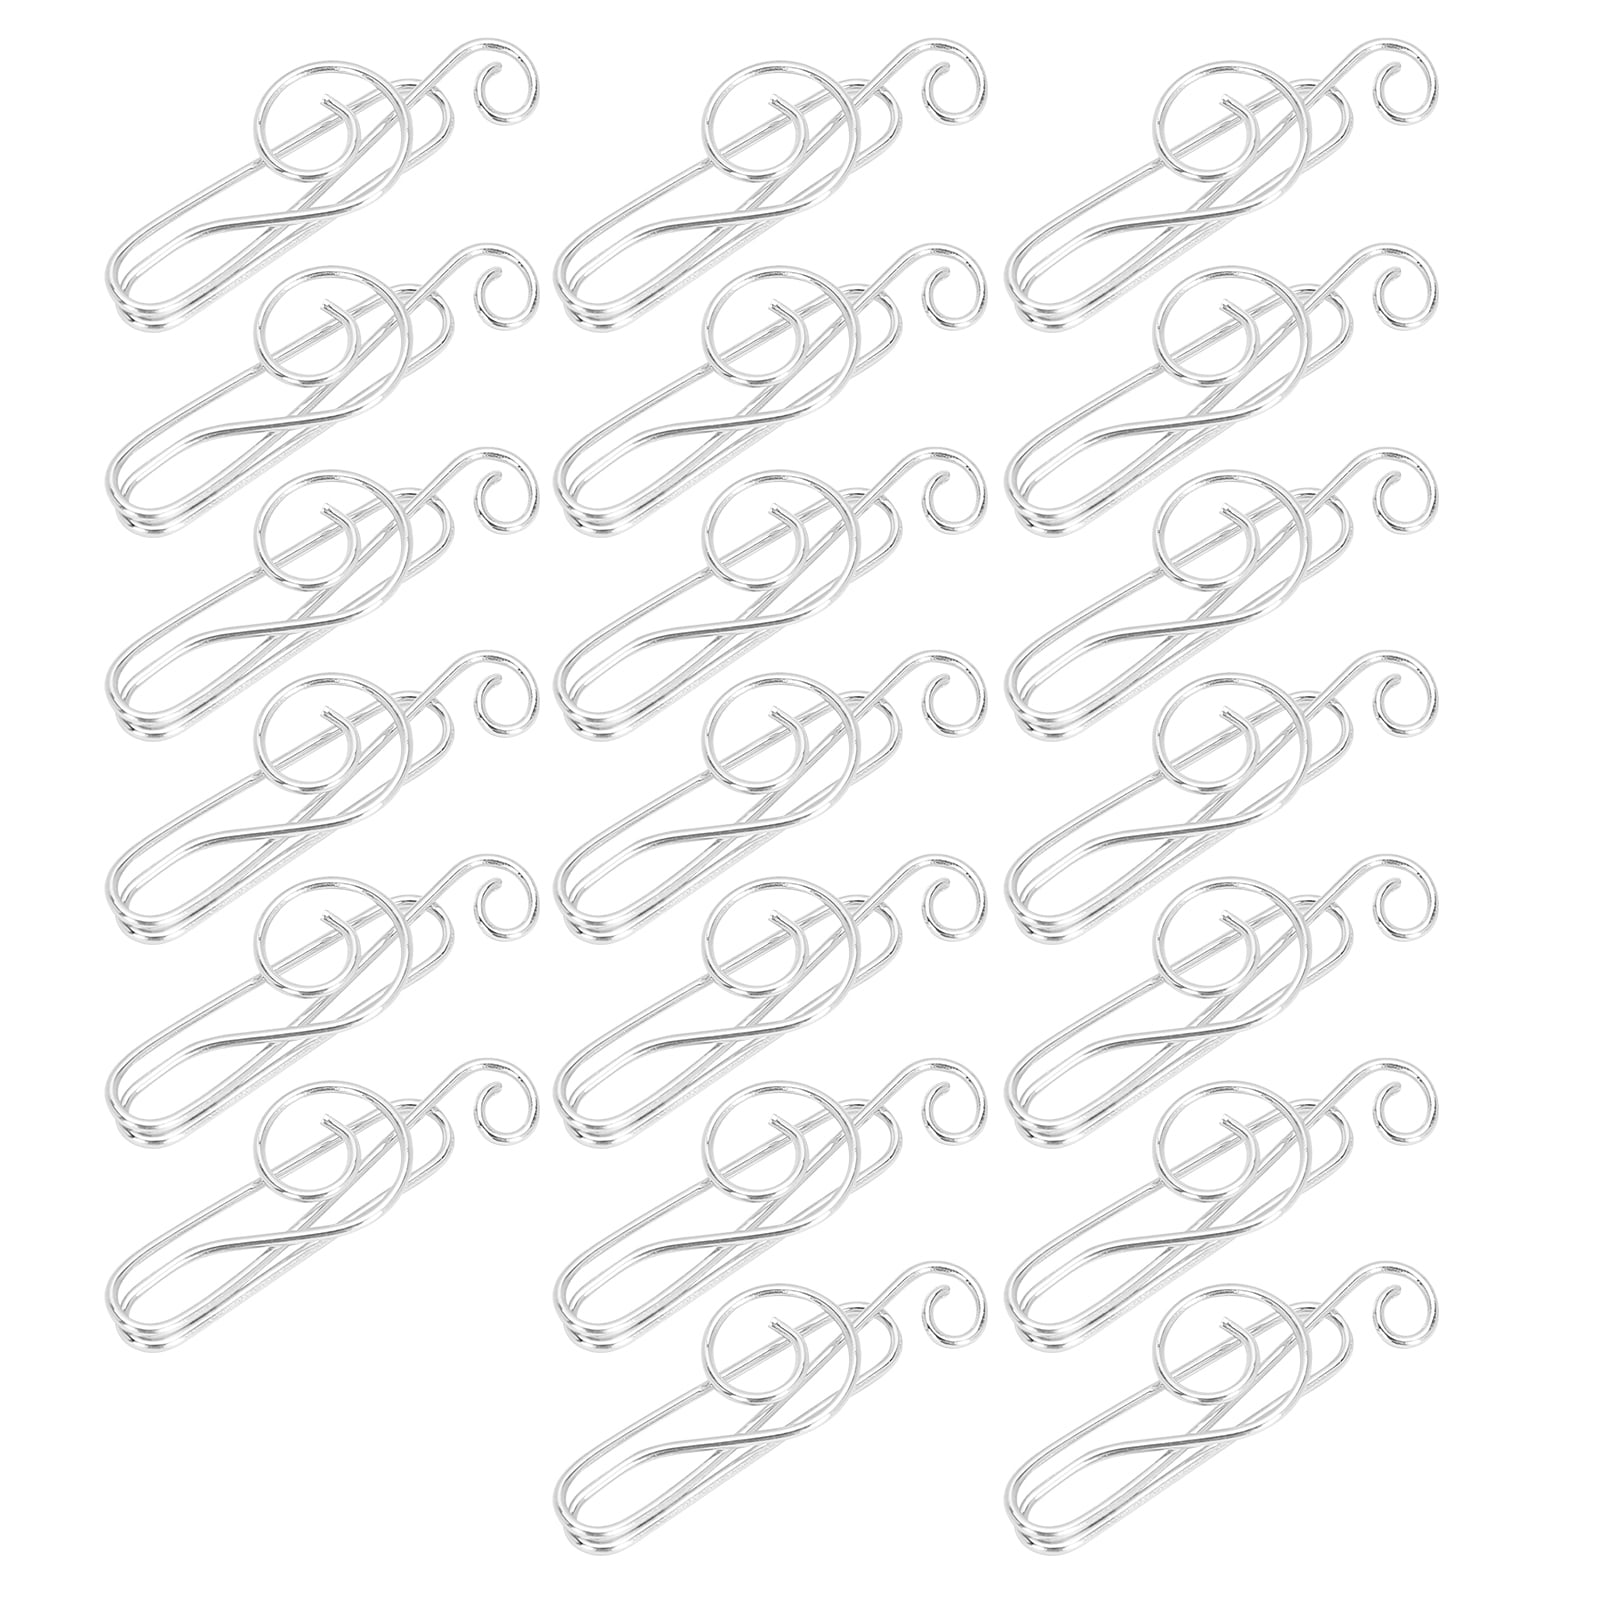 Details about   20Pcs Musical Note Paperclip Music Binder Shape Modeling Metal Craft Durable 